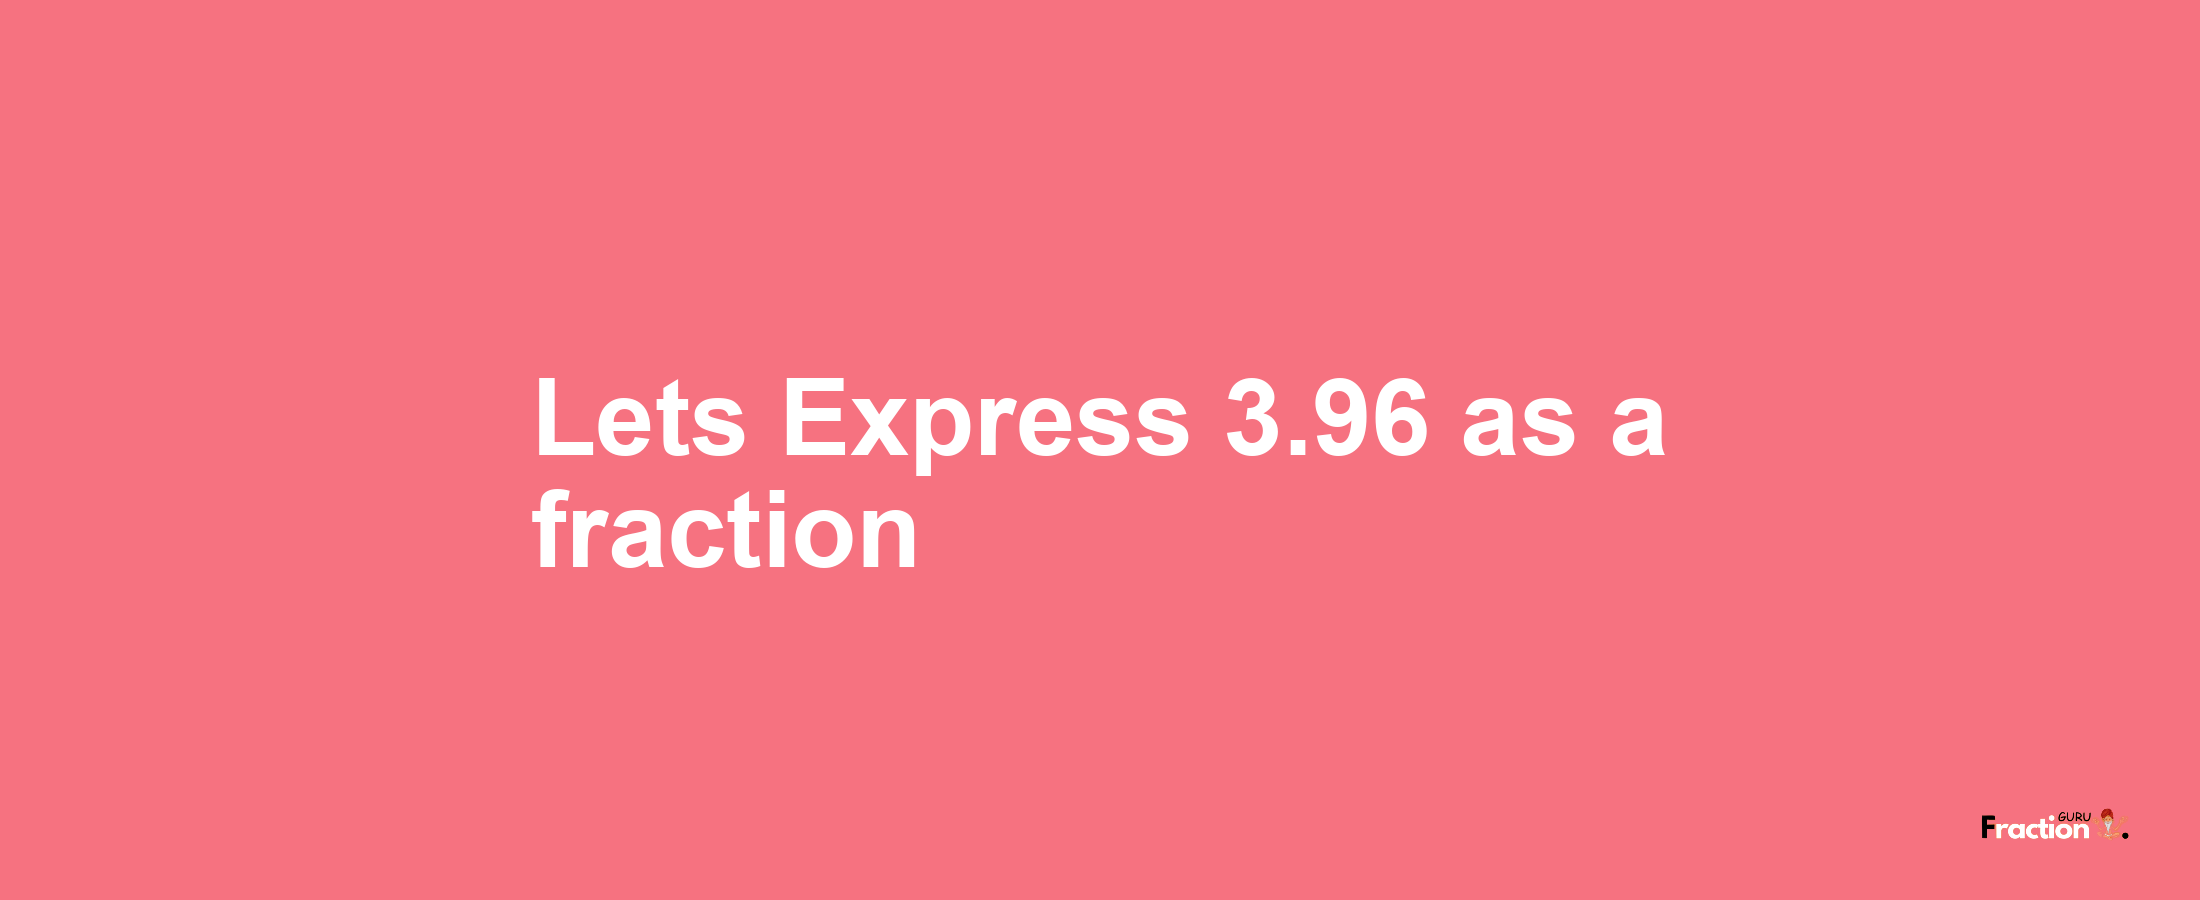 Lets Express 3.96 as afraction